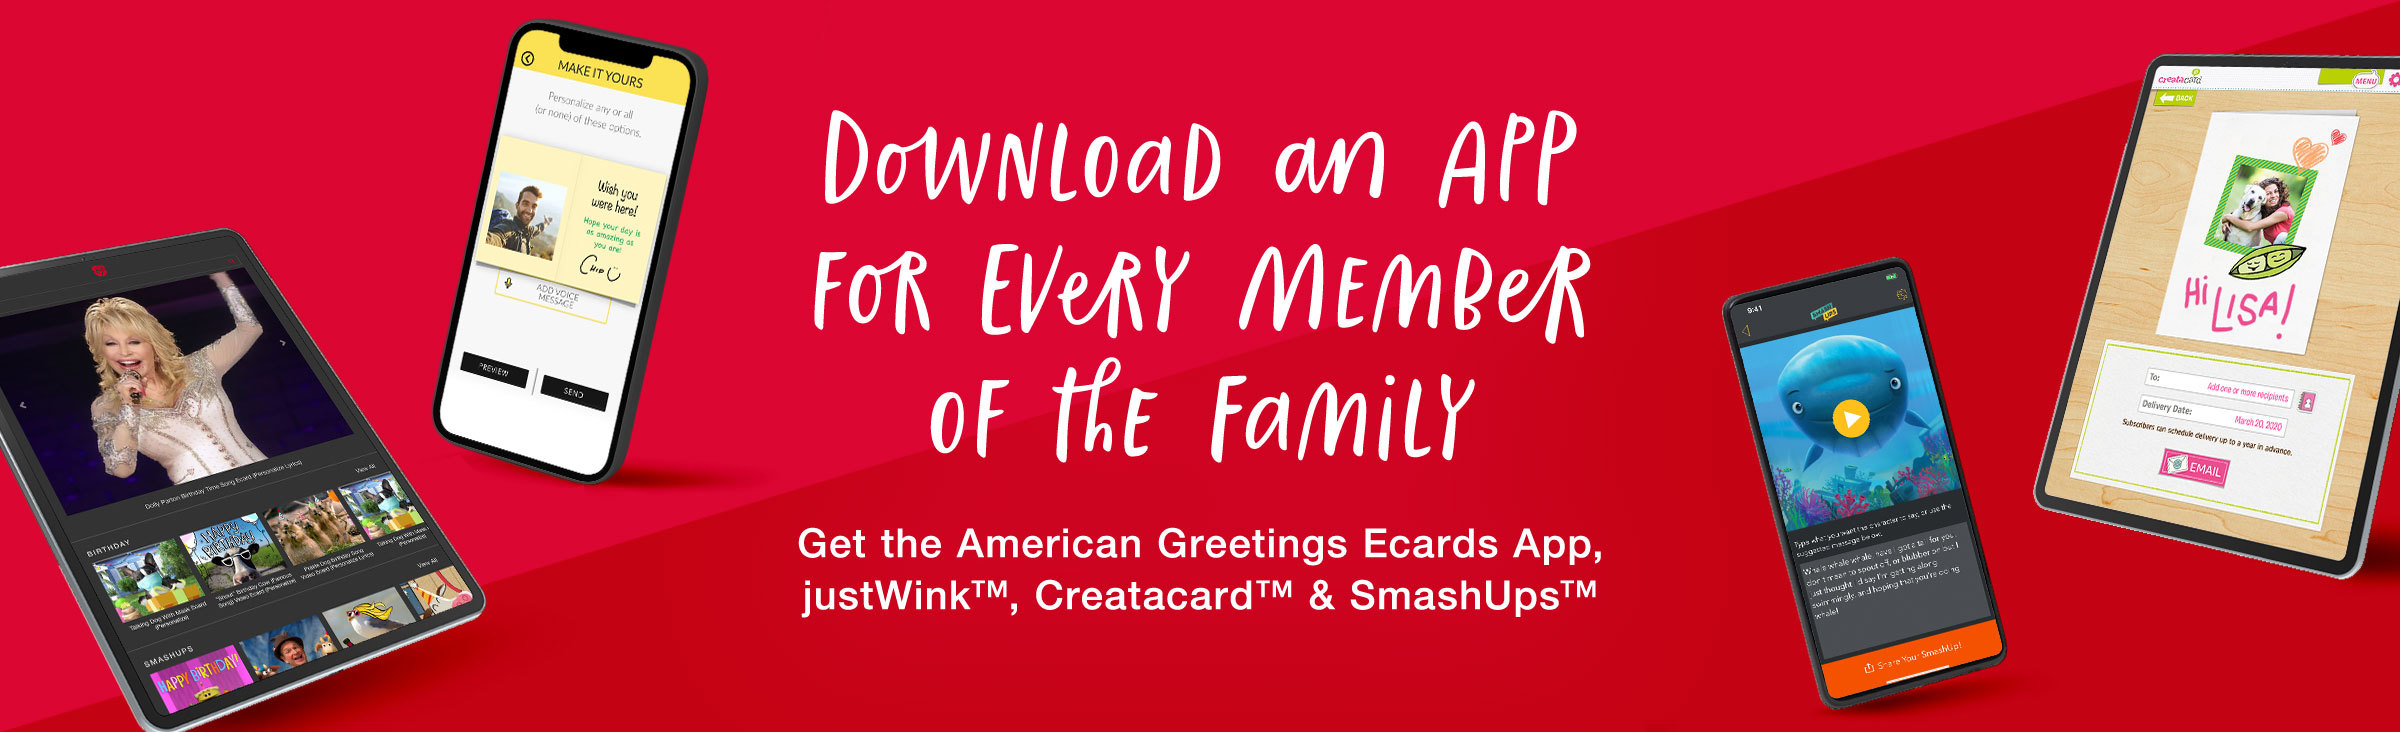 Download an app for every member of the family